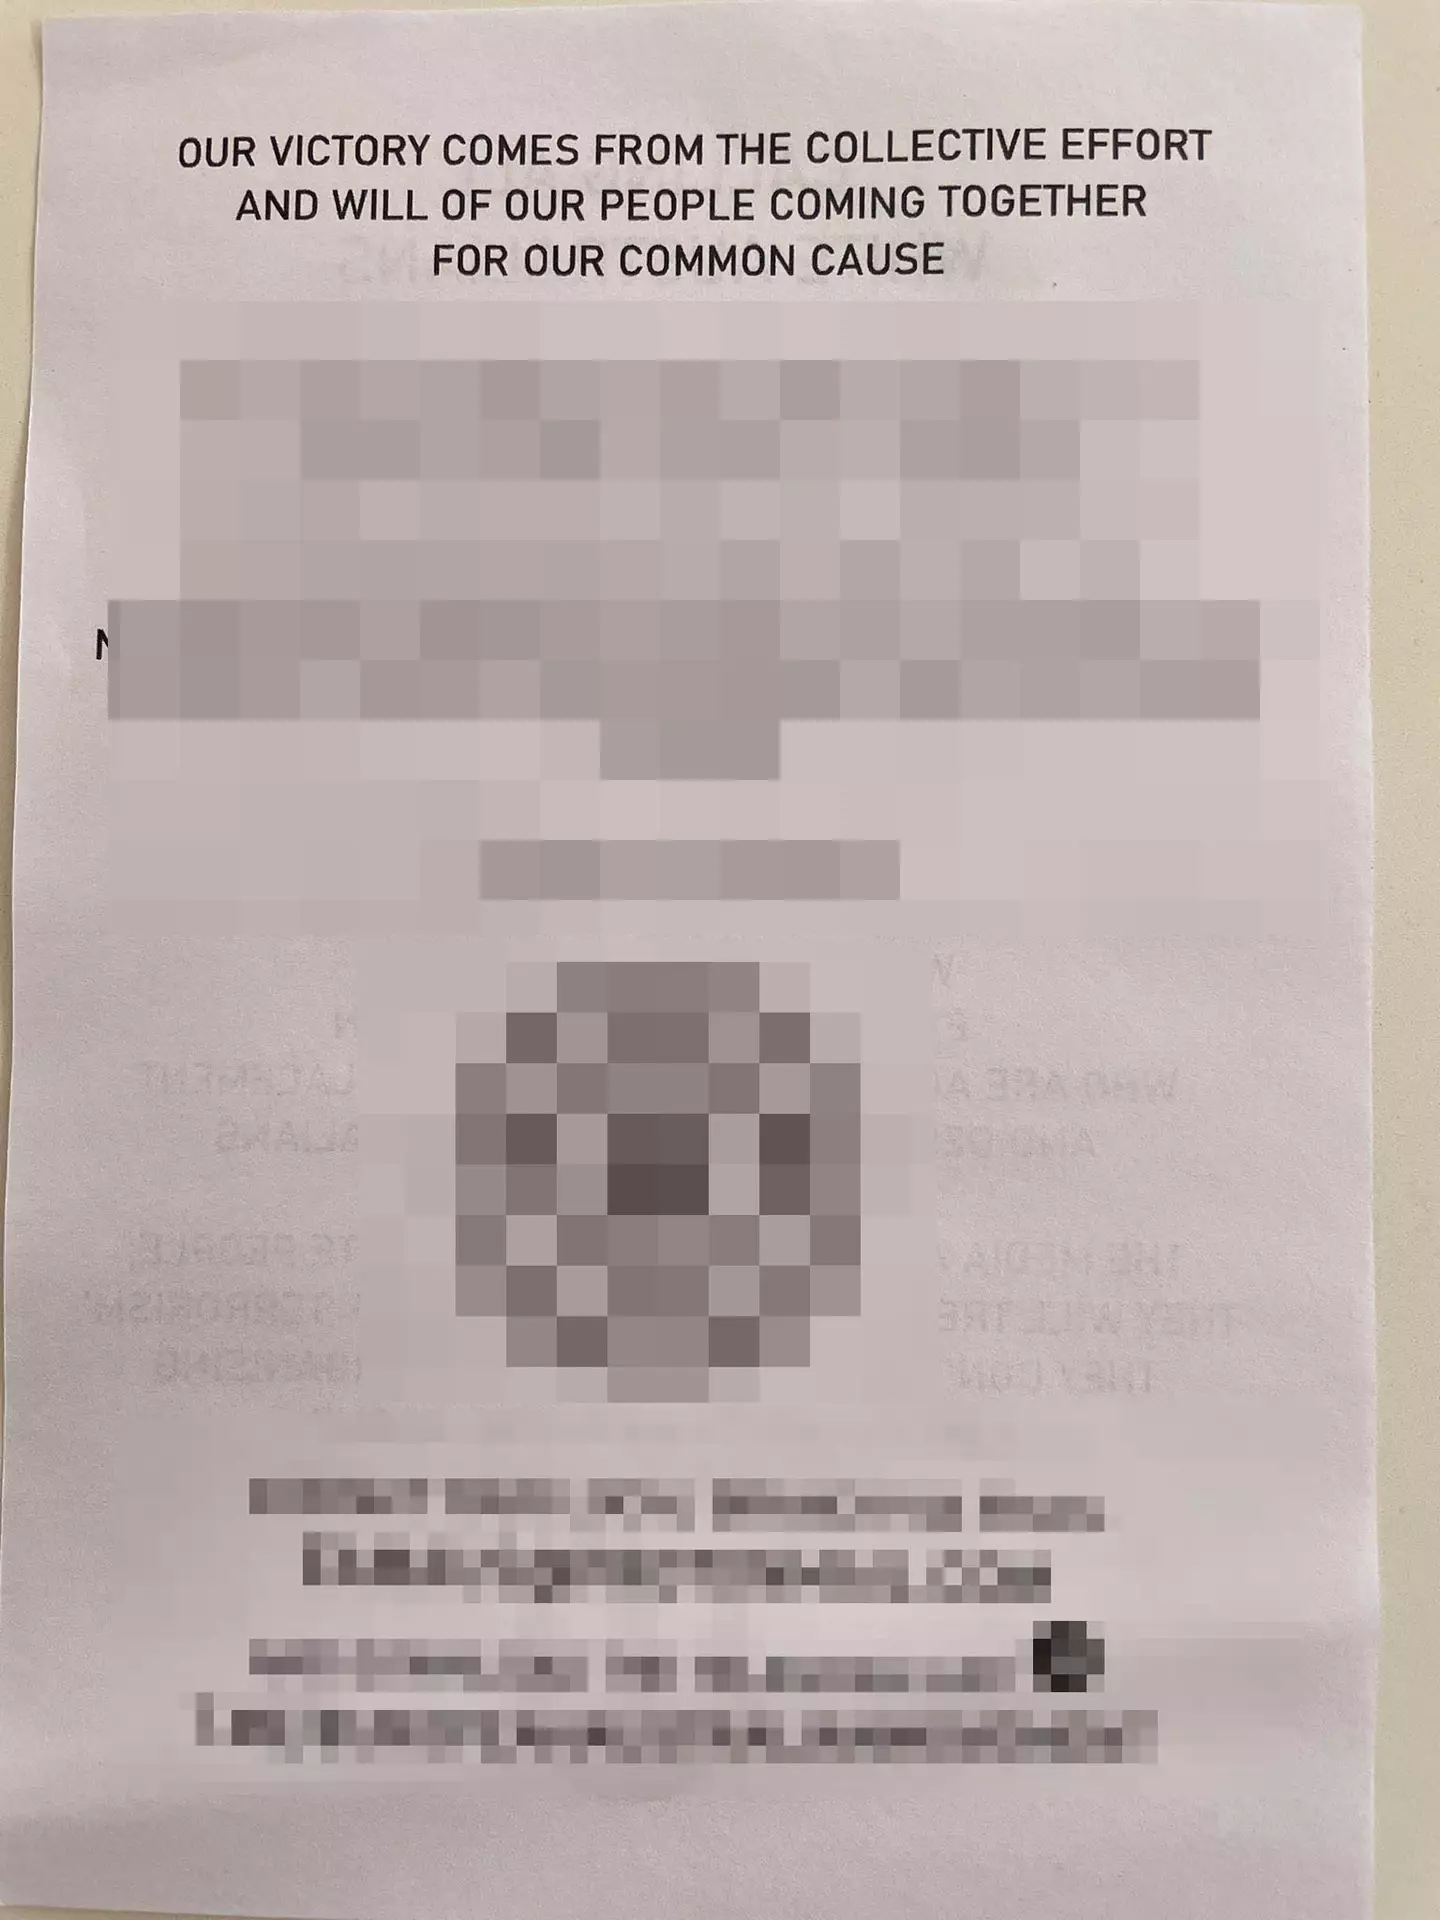 One of the leaflets dropped in a resident's mailbox.